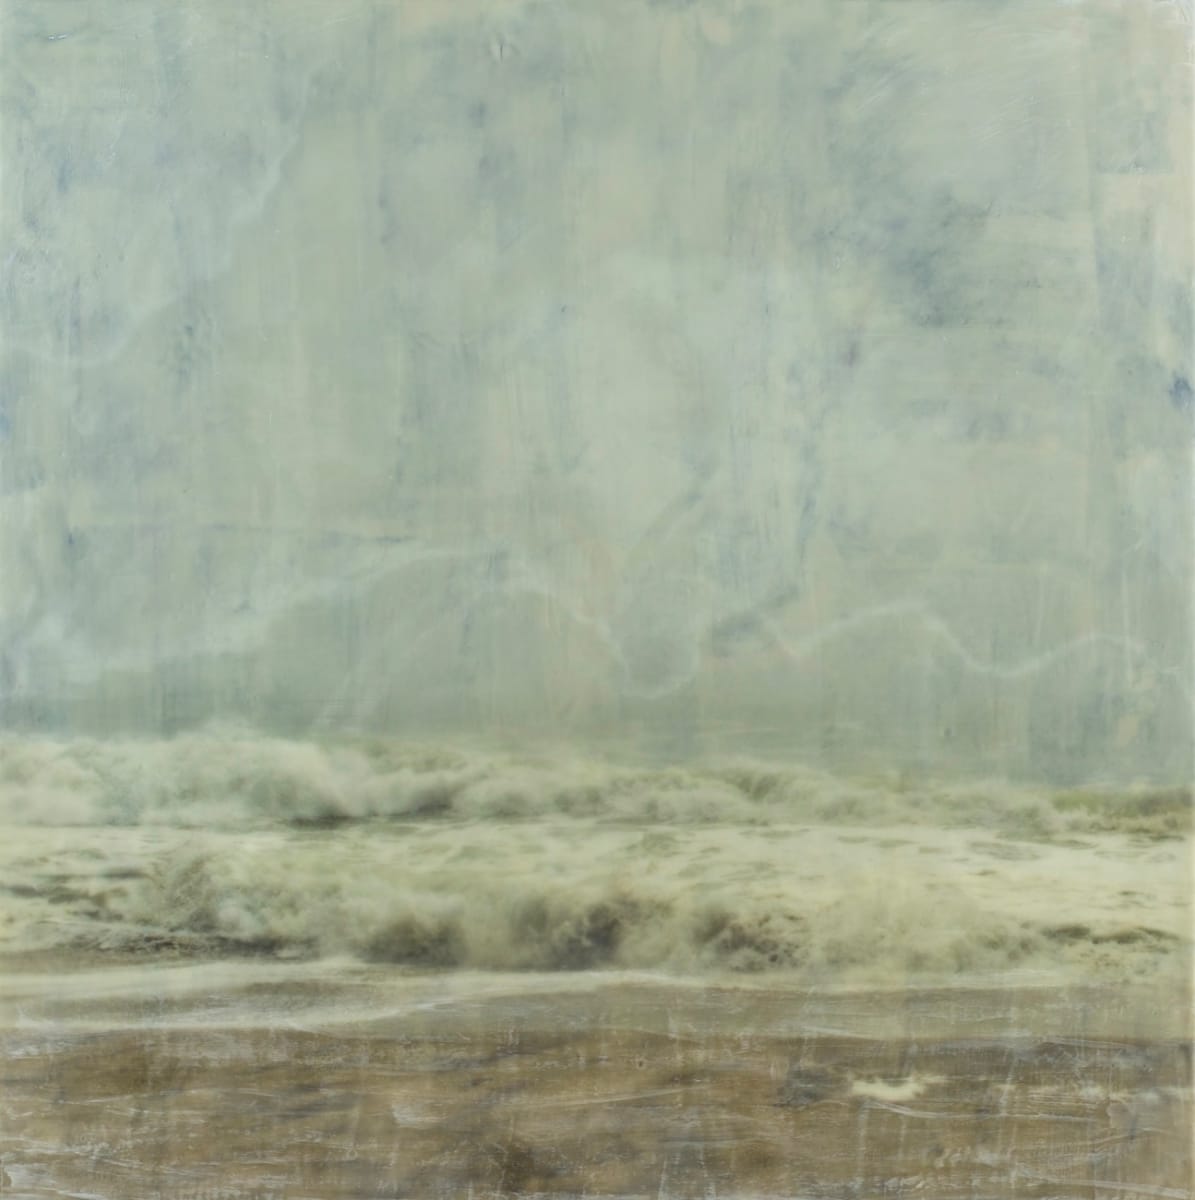 Drizzling by Deborah Llewellyn  Image: 35" x 35" Photo Encaustic on wood panel.  
Original photograph taken on Nantucket as a hurricane was approaching.   I manipulated the image and was printed on archival paper.  I then layer on encaustic medium and oils to create layers and depth.  